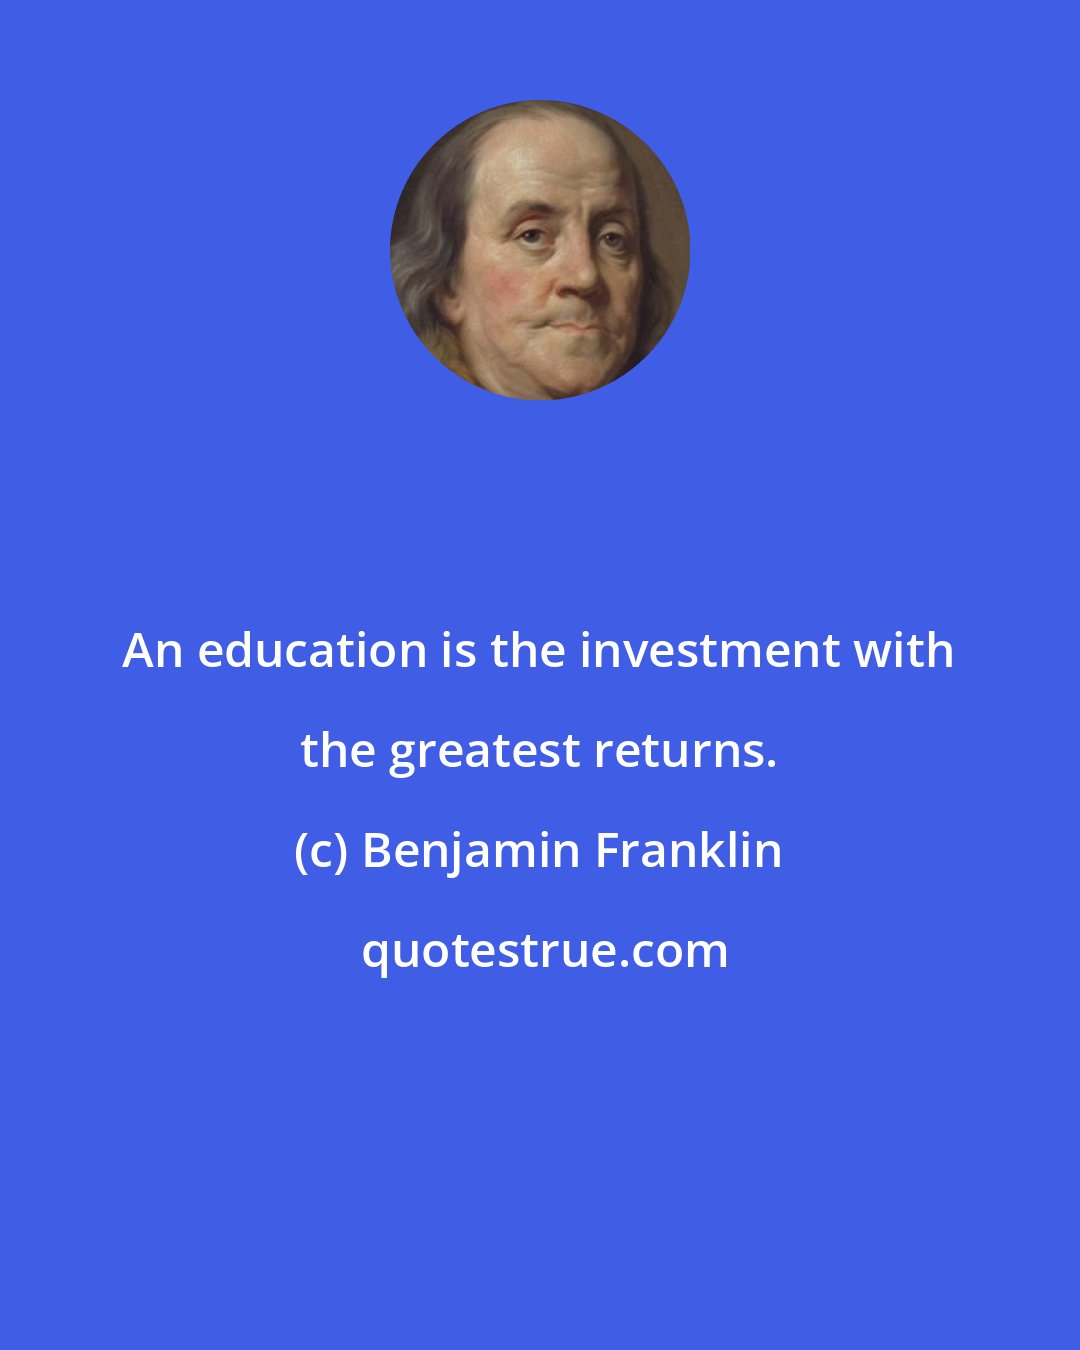 Benjamin Franklin: An education is the investment with the greatest returns.